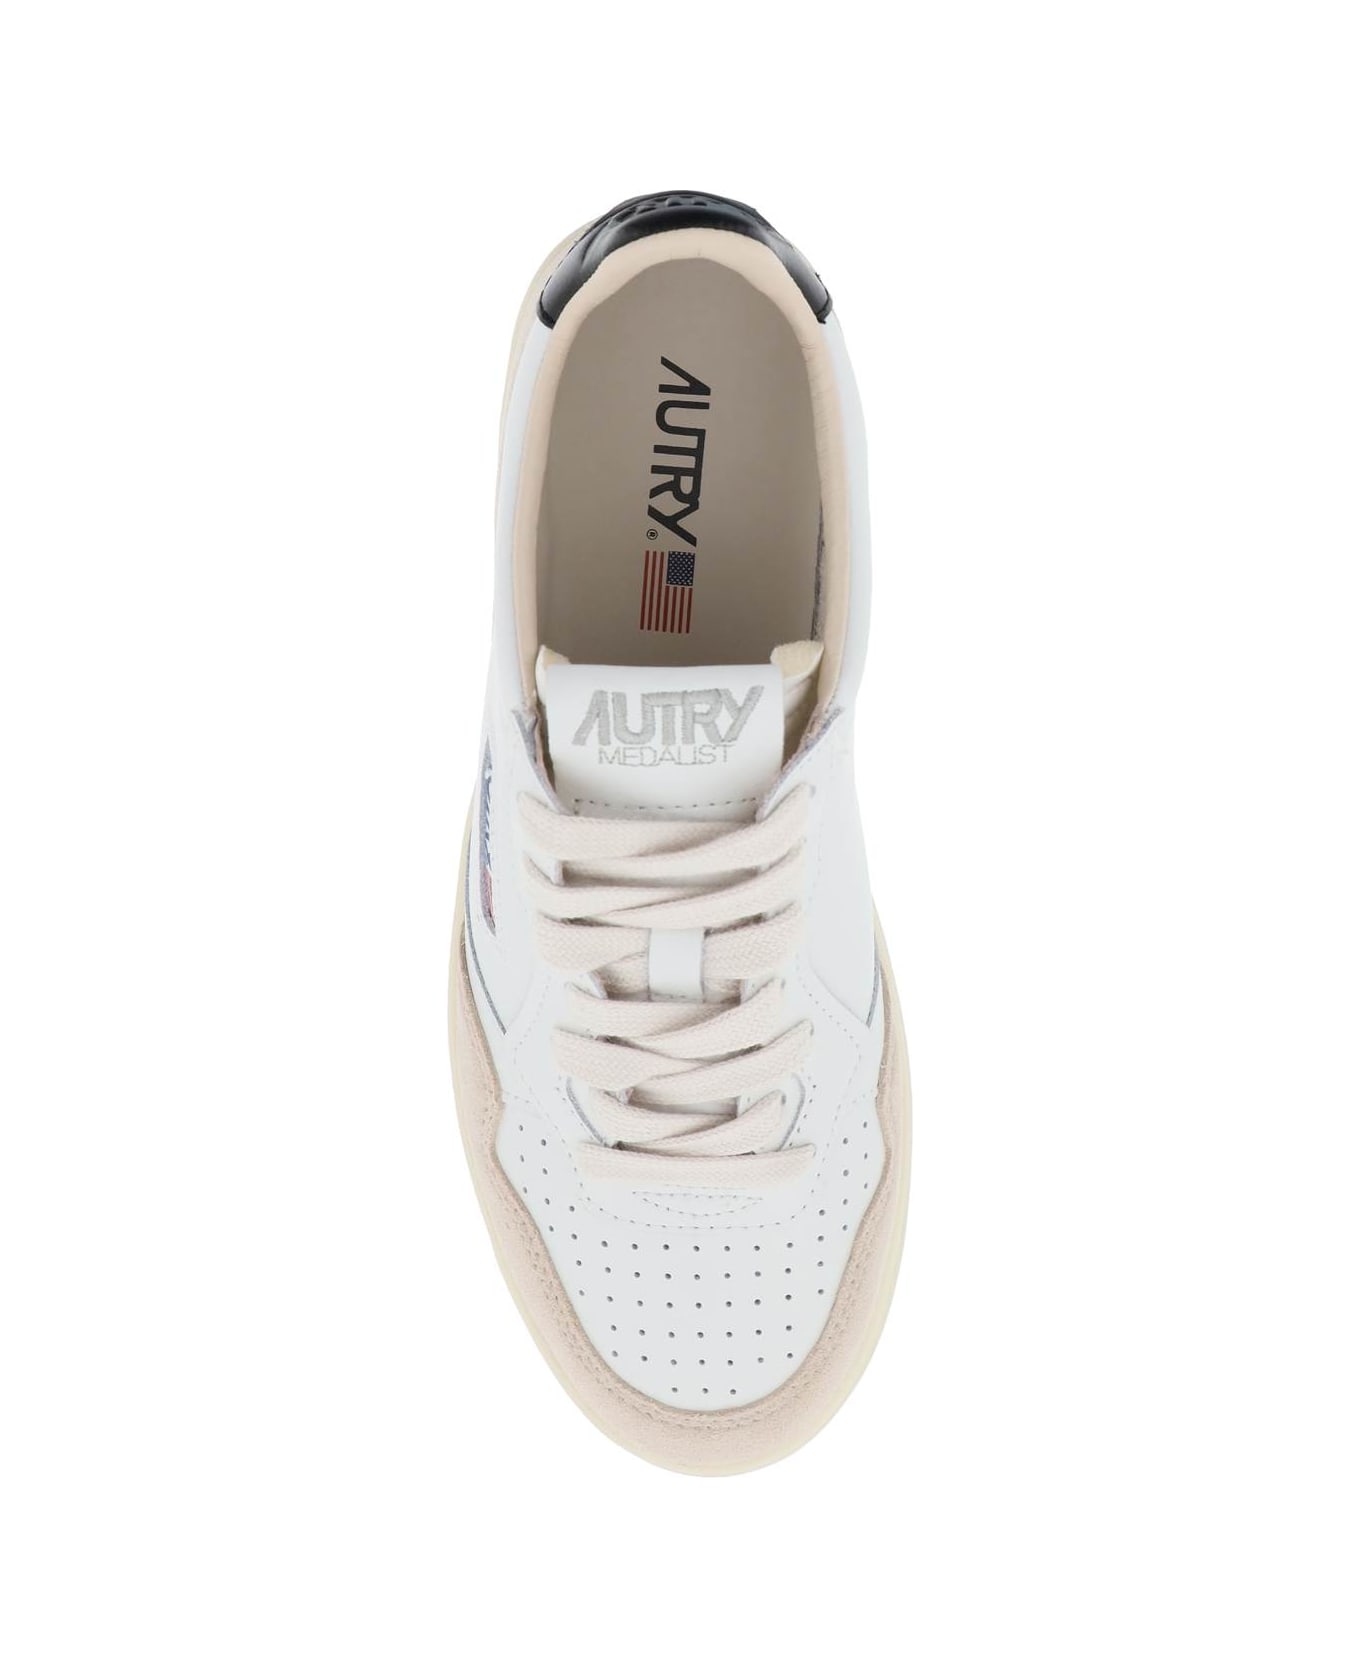 Autry Medalist Low Sneakers - White/Black